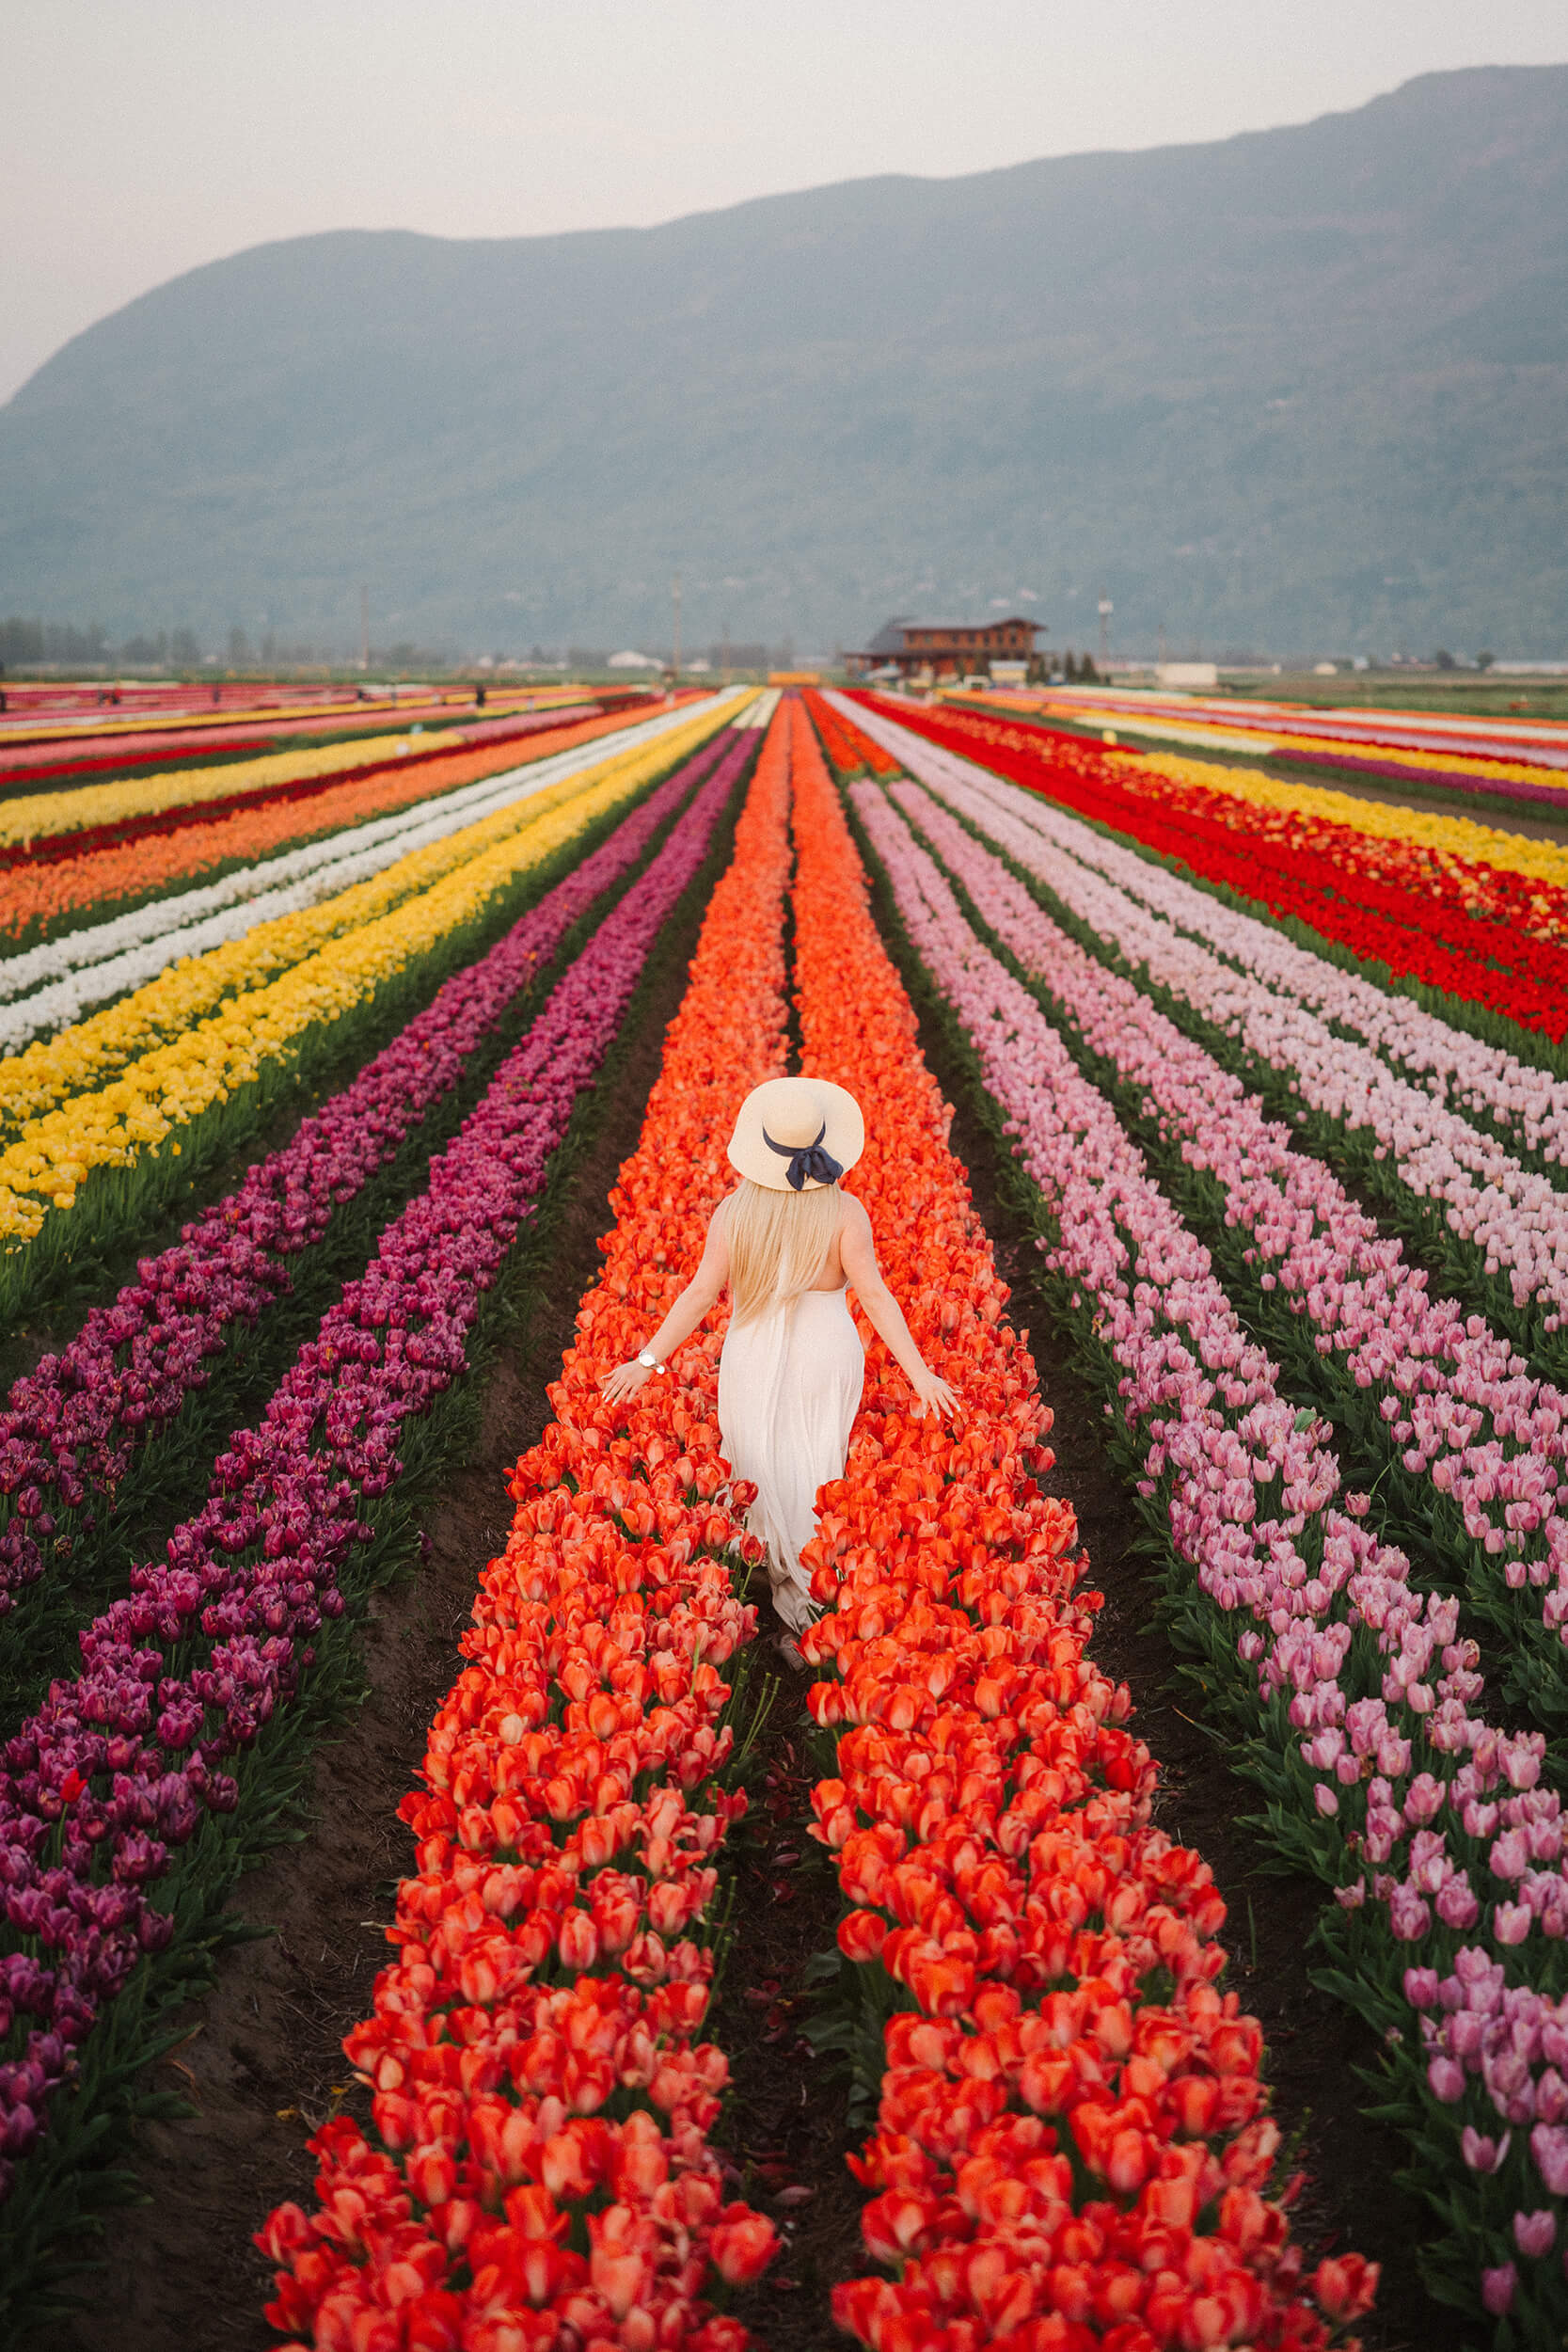 A women stands inbetween rows of colourful tulips, with a mountain in the distance